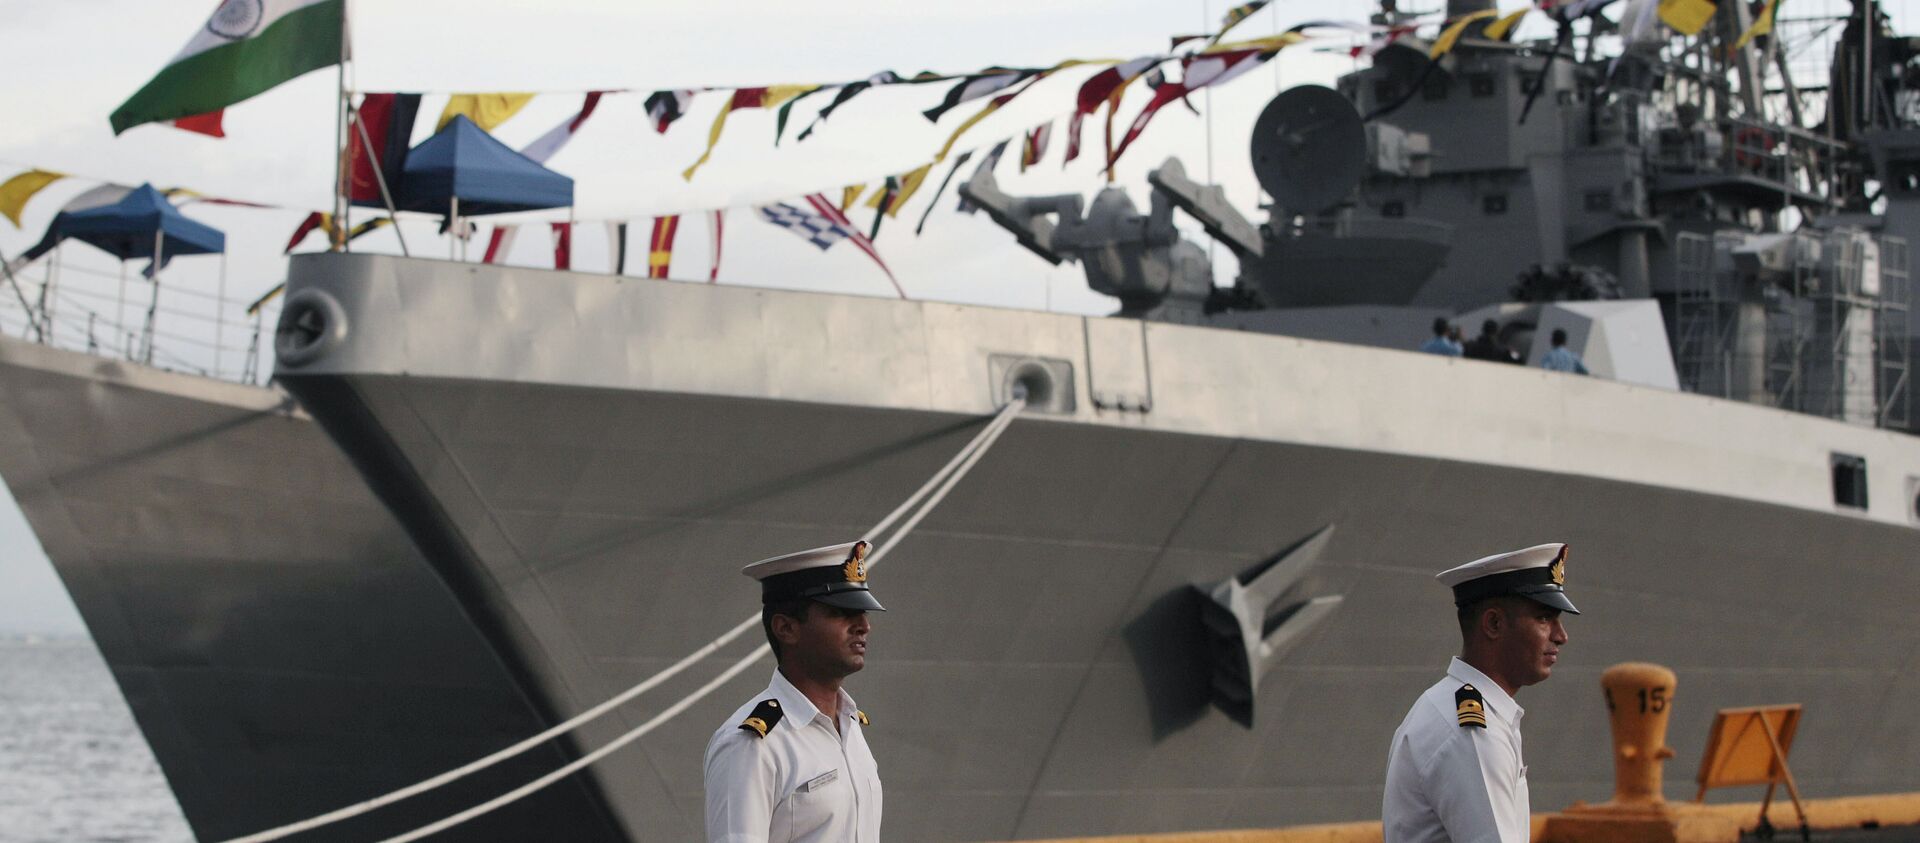 Indian sailors walk beside Indian Navy ships, from left, INS Ranvijay (D55), a Rajput class destroyer, and INS Saptura, a Shivalik-class stealth multi-role frigate, as they arrive at Berth 15, South Harbour, in Manila, Philippines on Wednesday, June 12, 2013 - Sputnik International, 1920, 02.08.2021